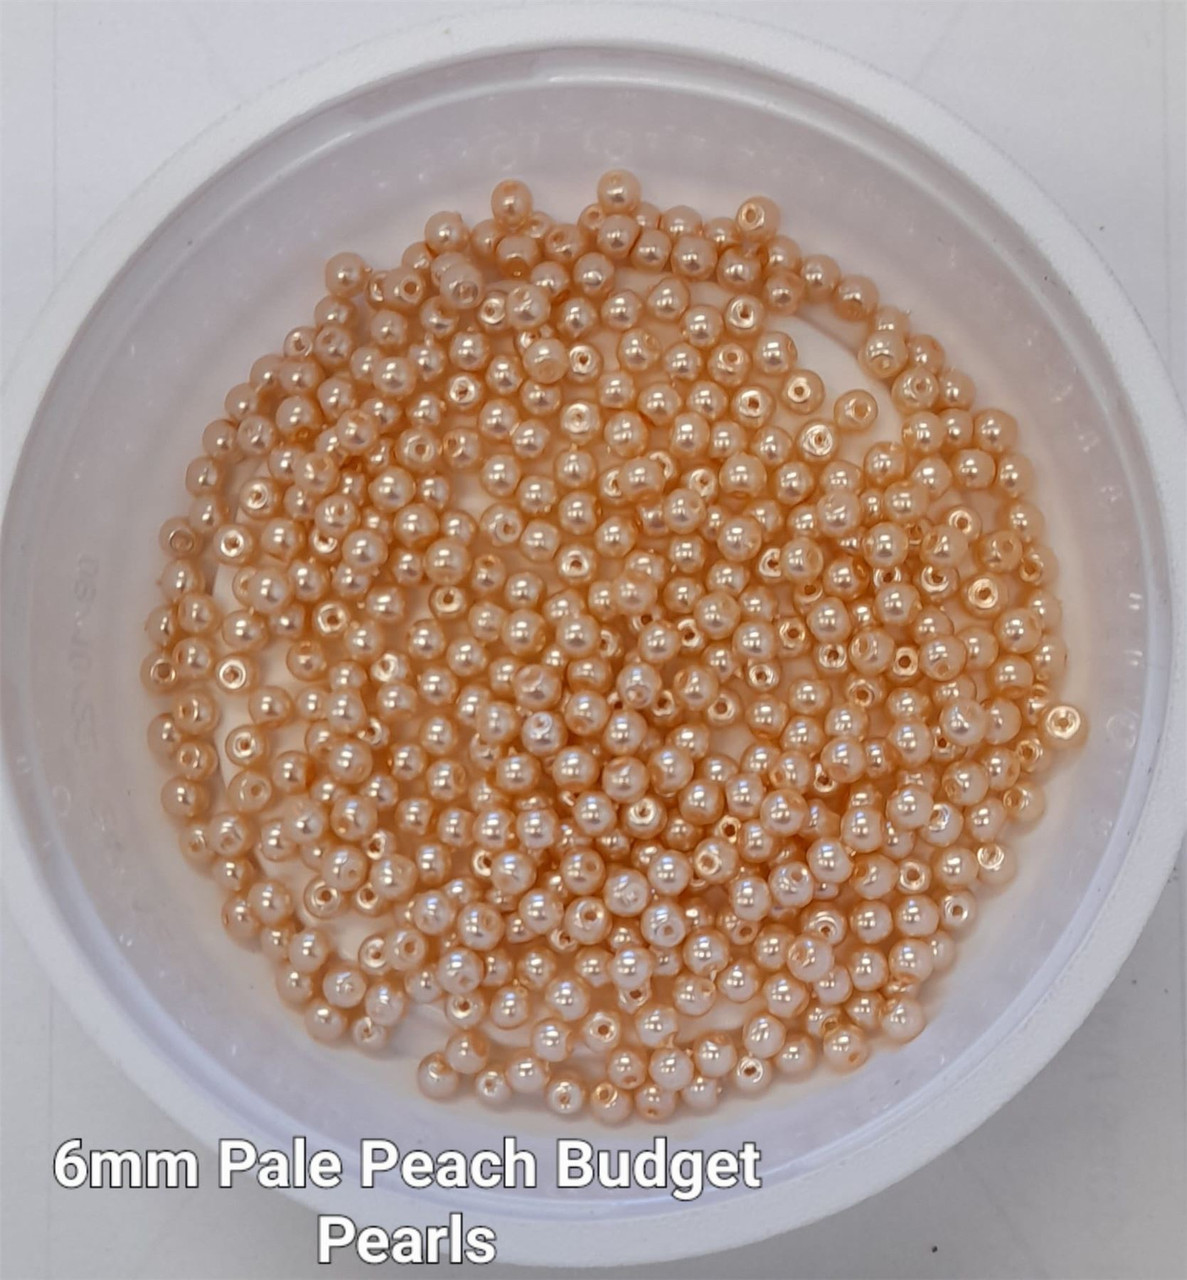 6mm budget Glass Pearls - Pale Peach (200 beads)